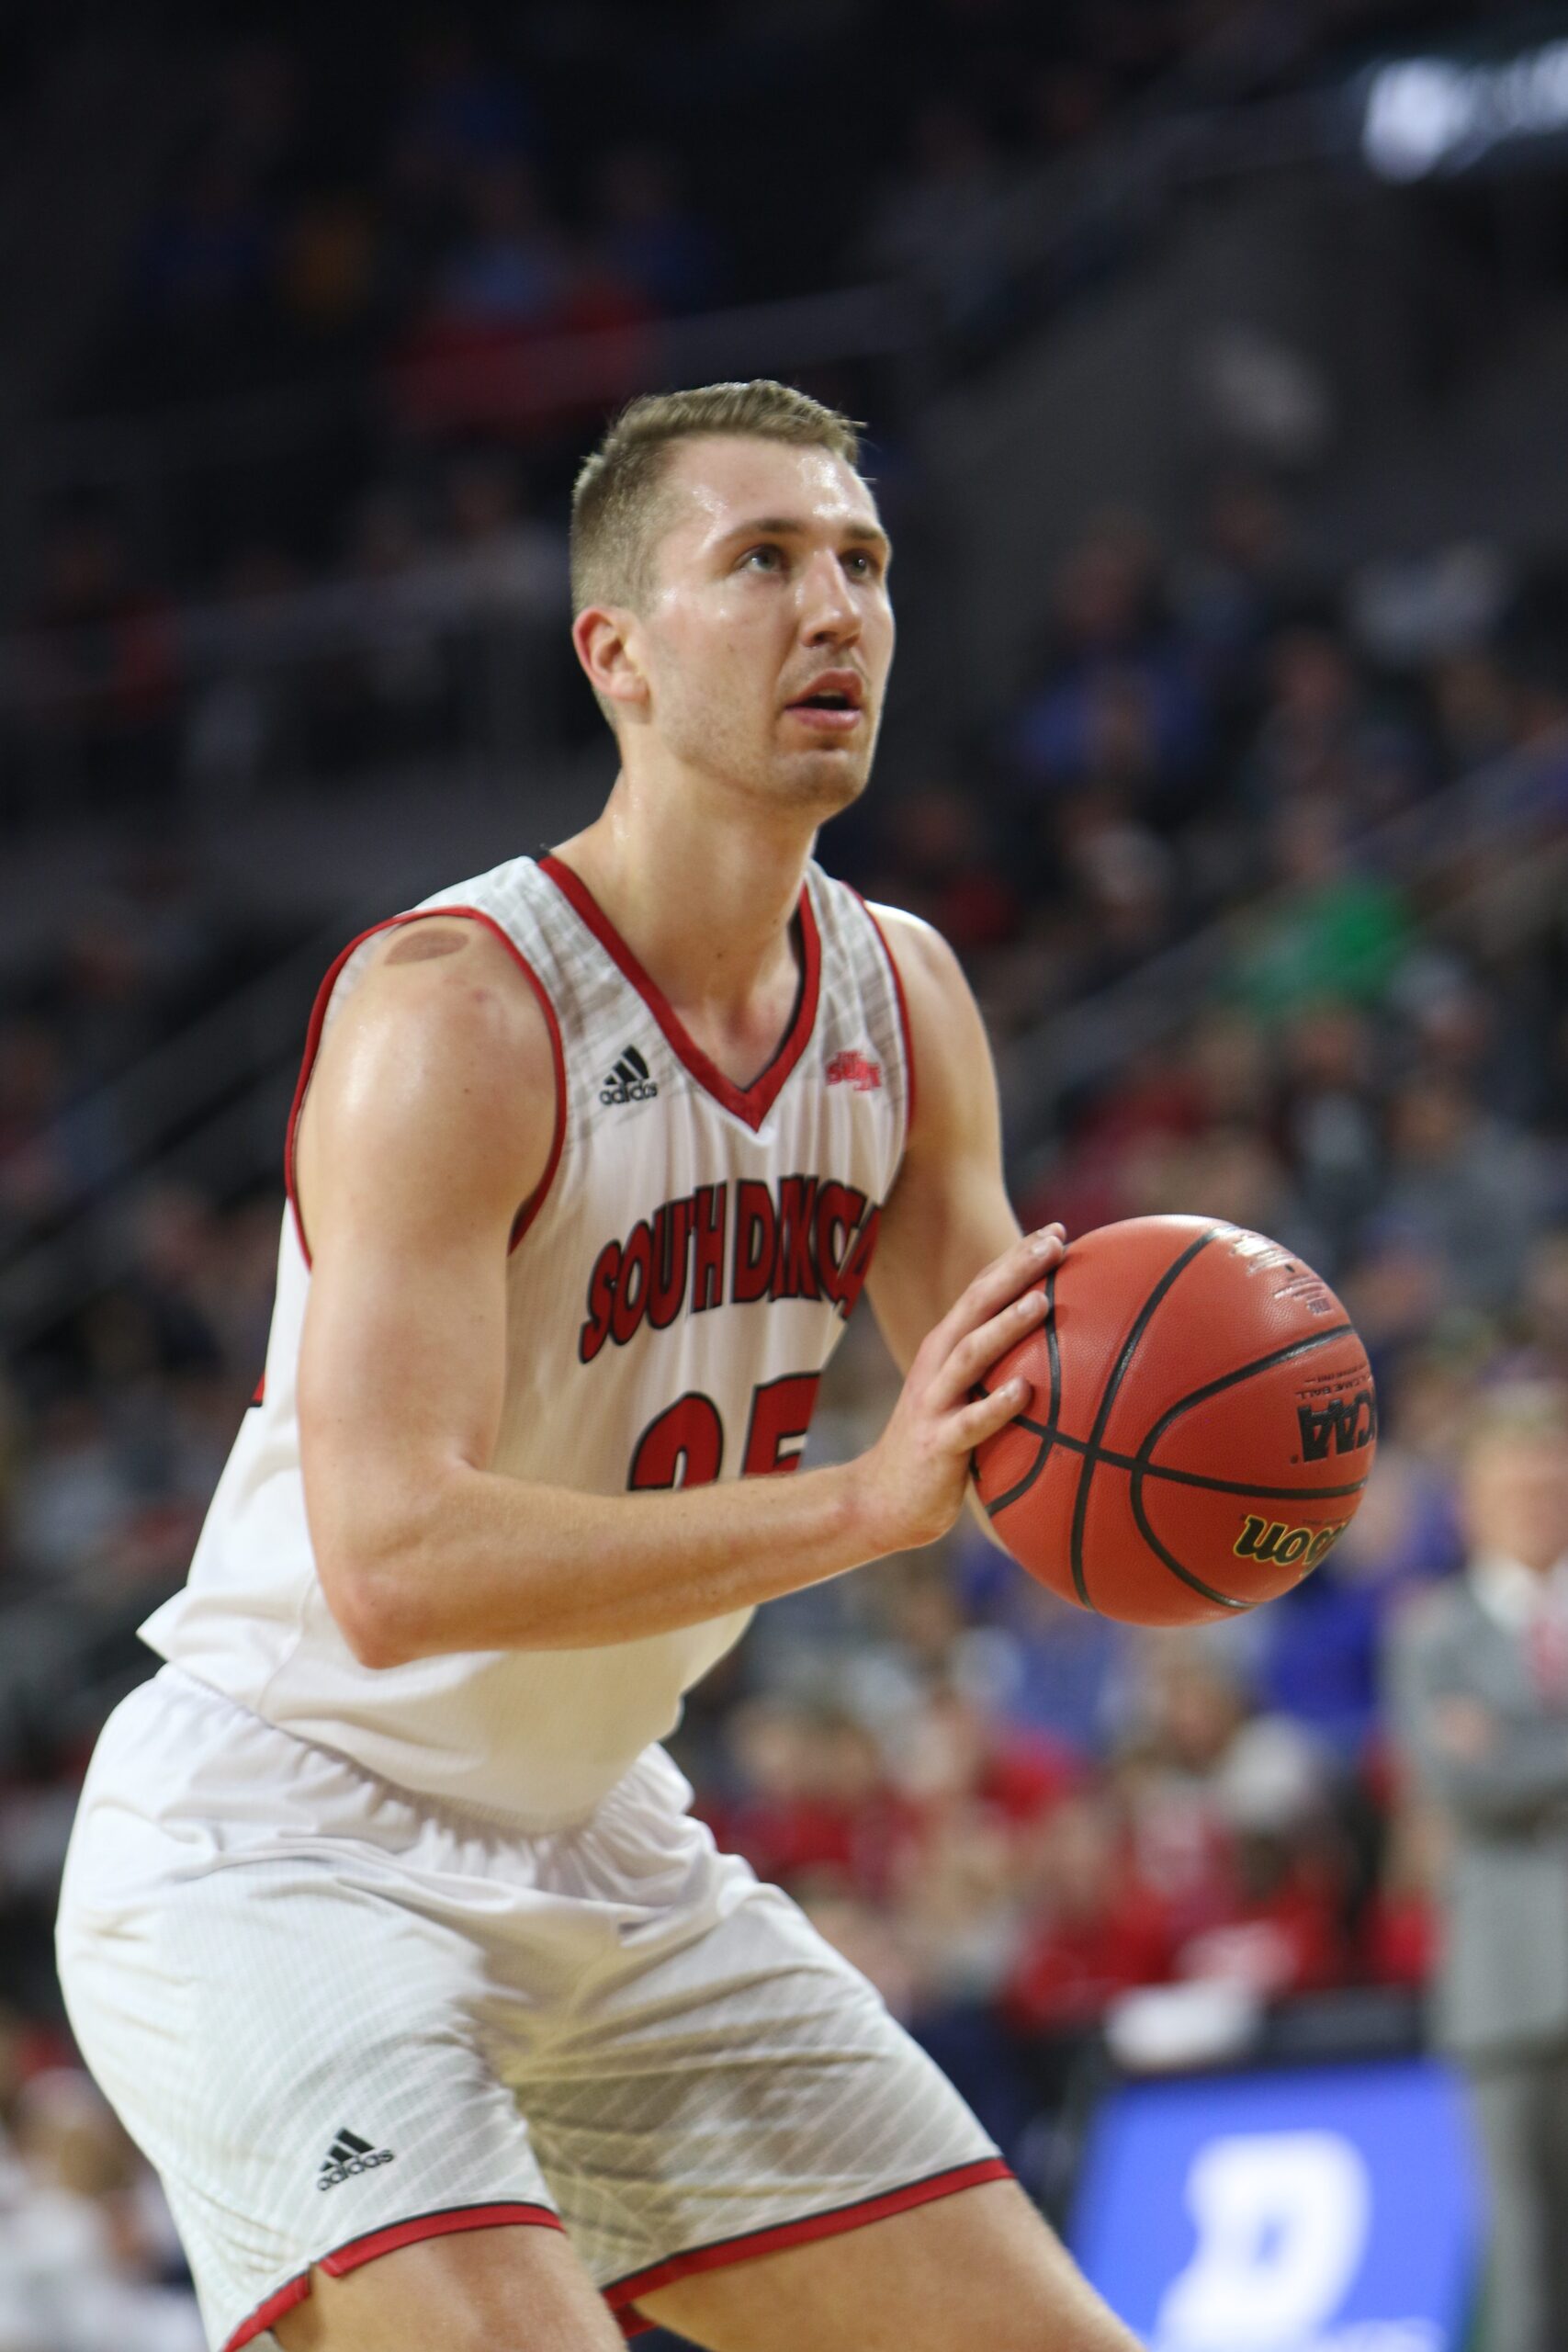 Hagedorn signs with agency, speaking with NBA teams